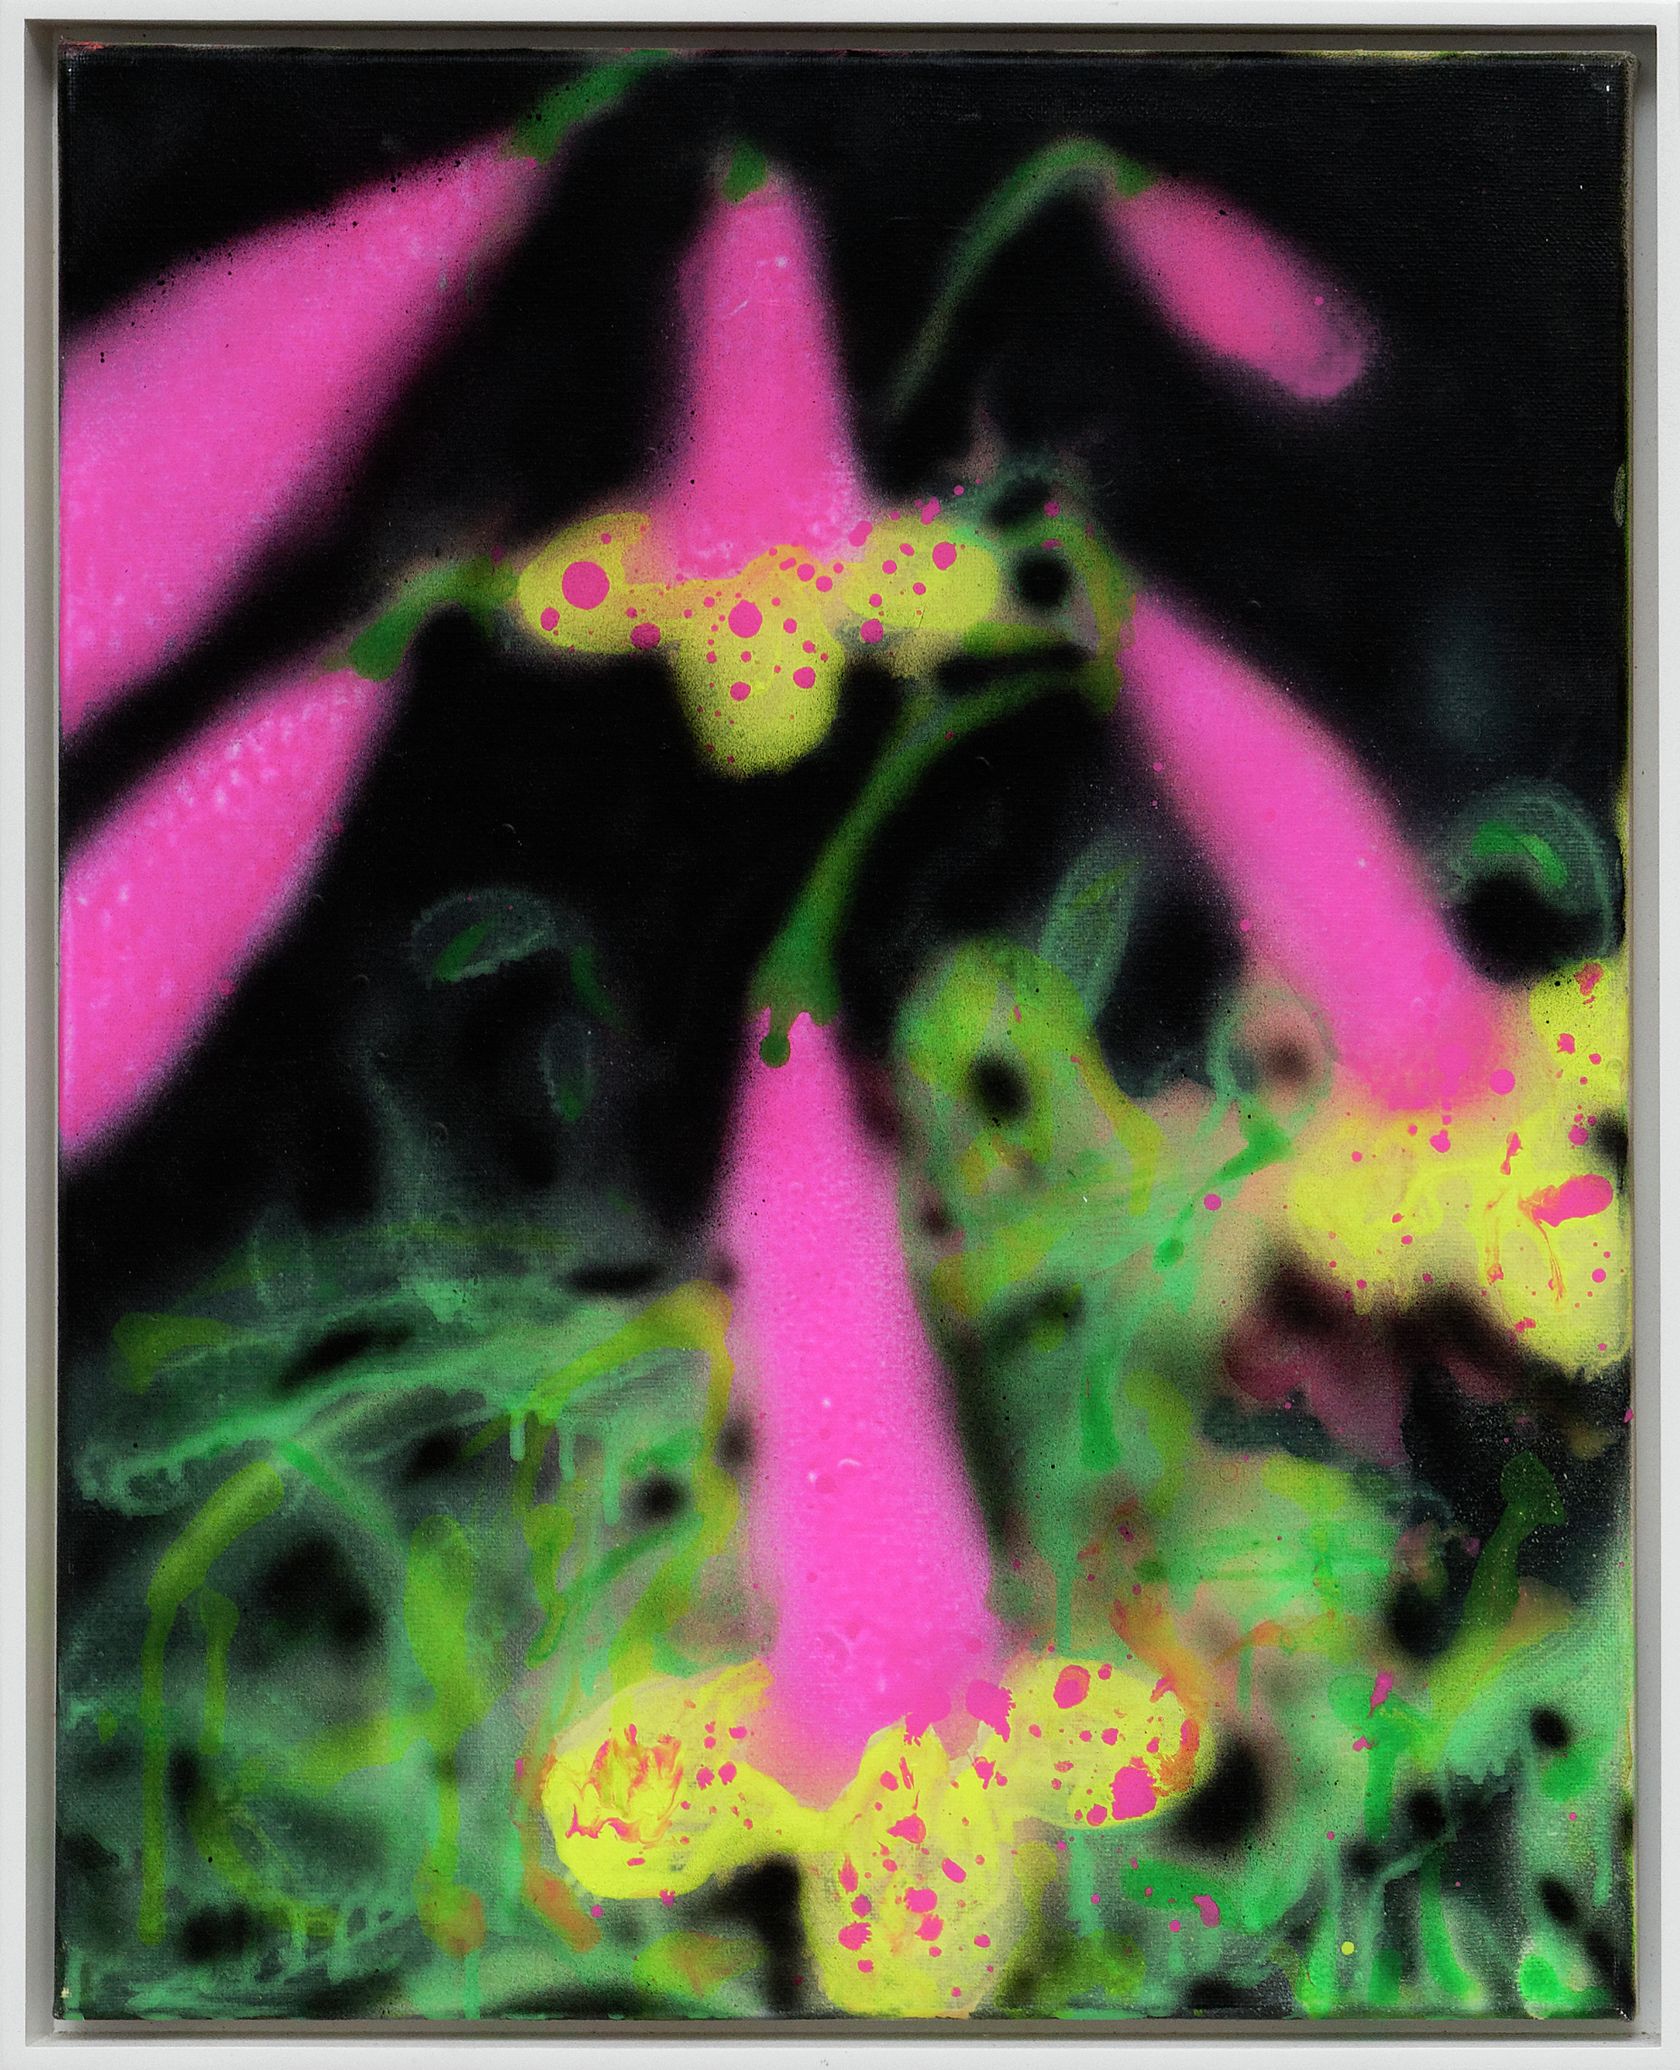 Kevin Ford, Pink and Yellow Orchids, 2019 Acrylique sur toile51 × 41 cm / 20 × 16 in. | 53 × 43 × 4 cm / 20 7/8 × 16 7/8 × 1 5/8 in. (encadré/framed)